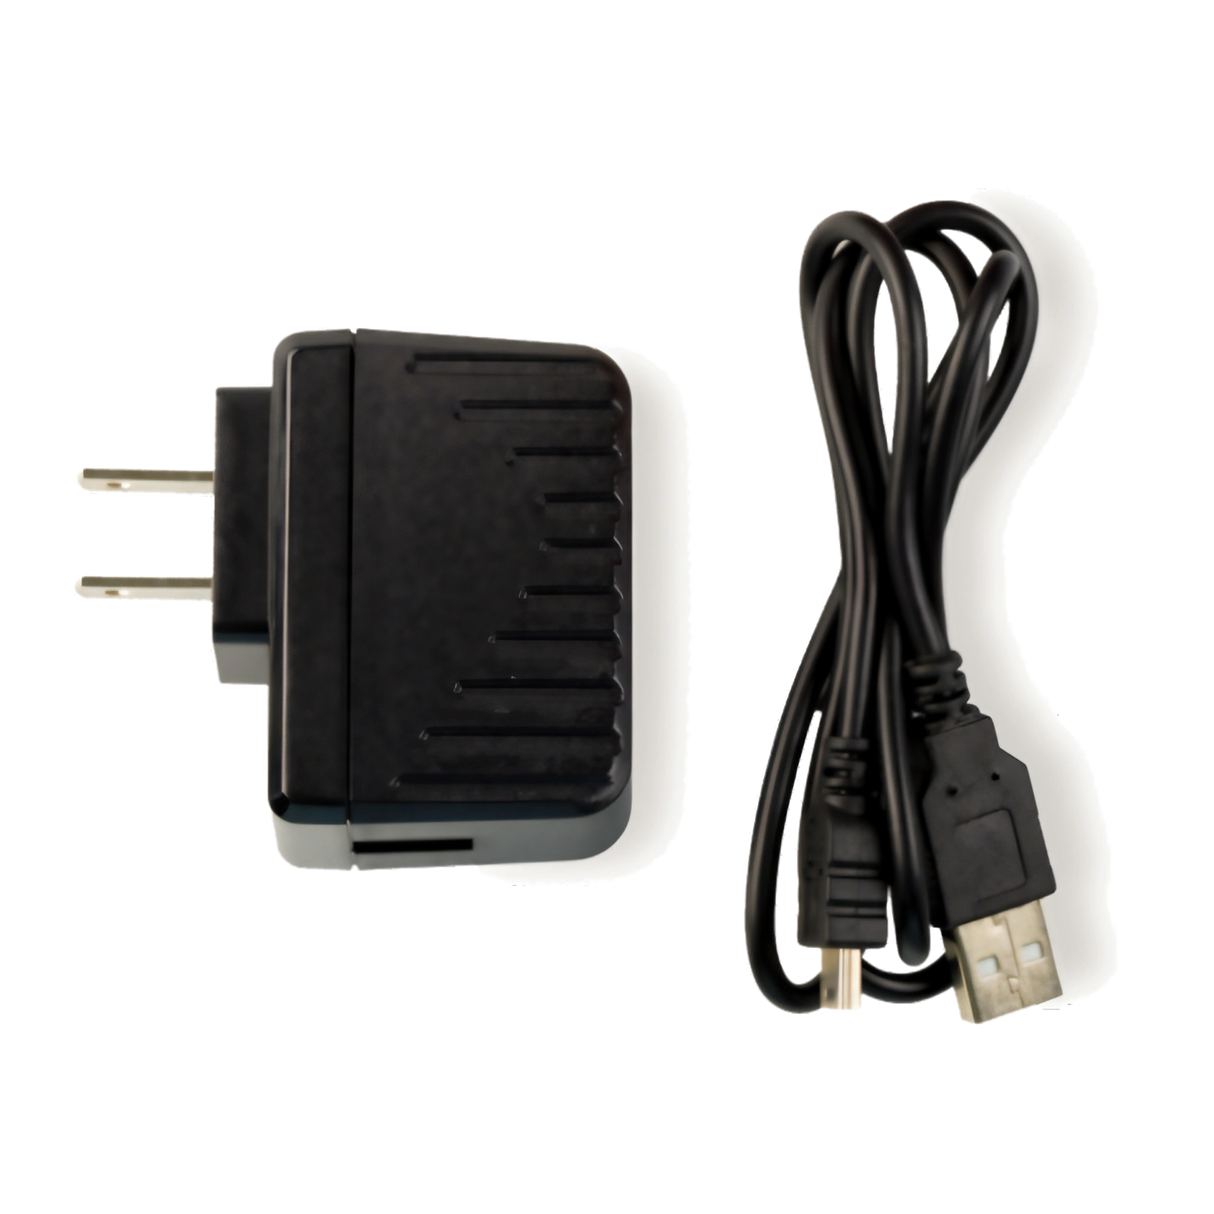 Storz & Bickel Crafty Vaporizer Power Adapter with USB Cable - Top View